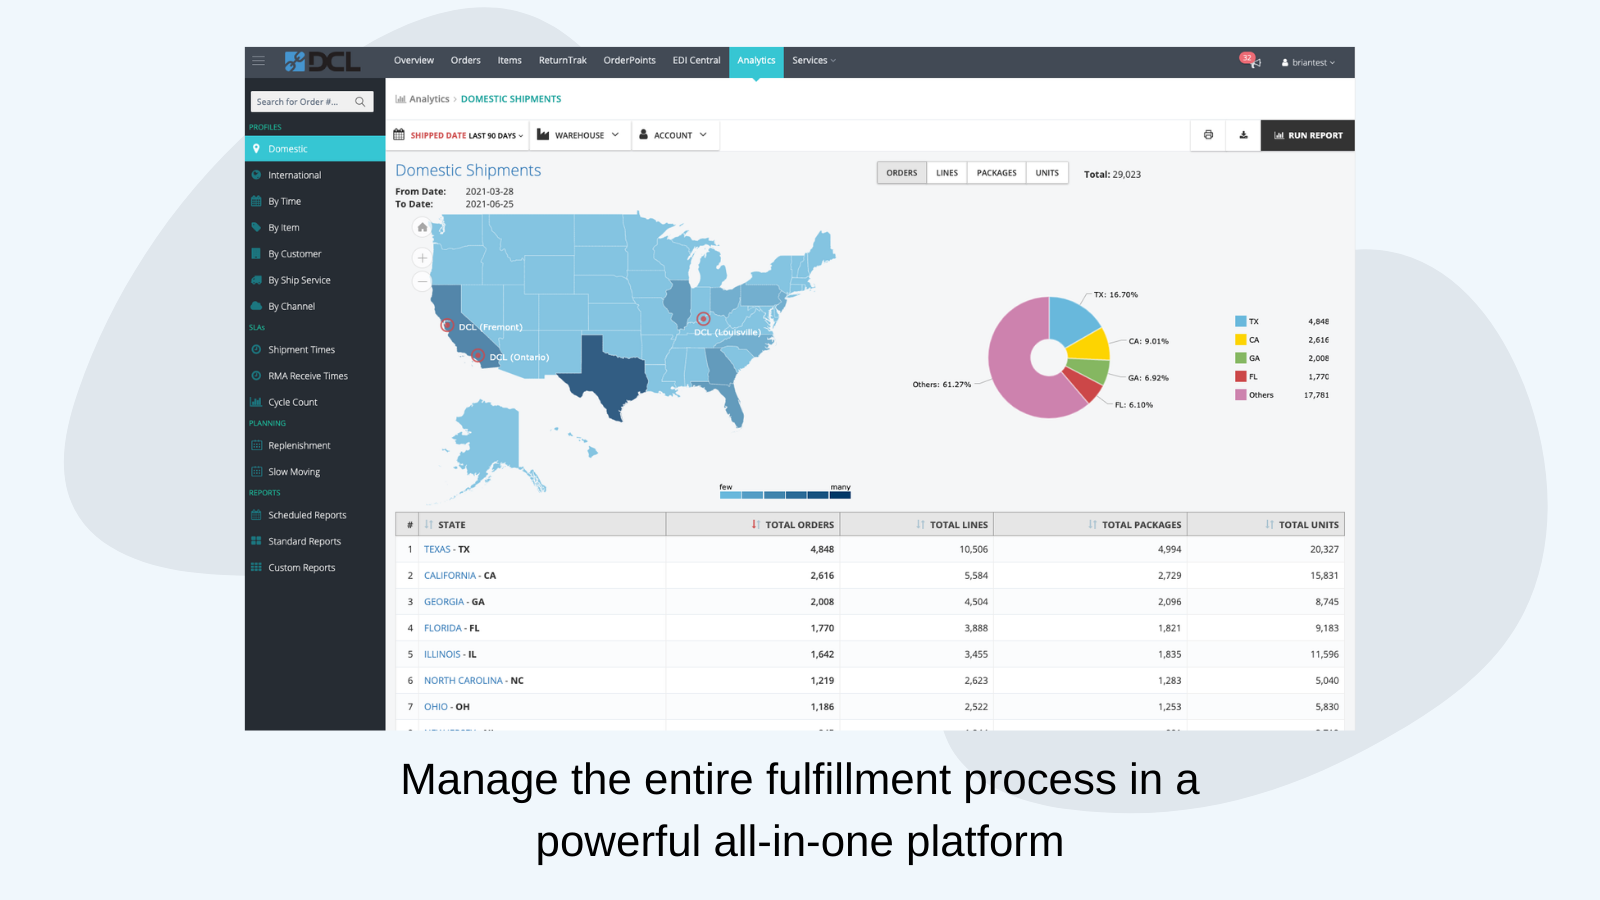 Manage entire fulfillment process in a all-in-one platform